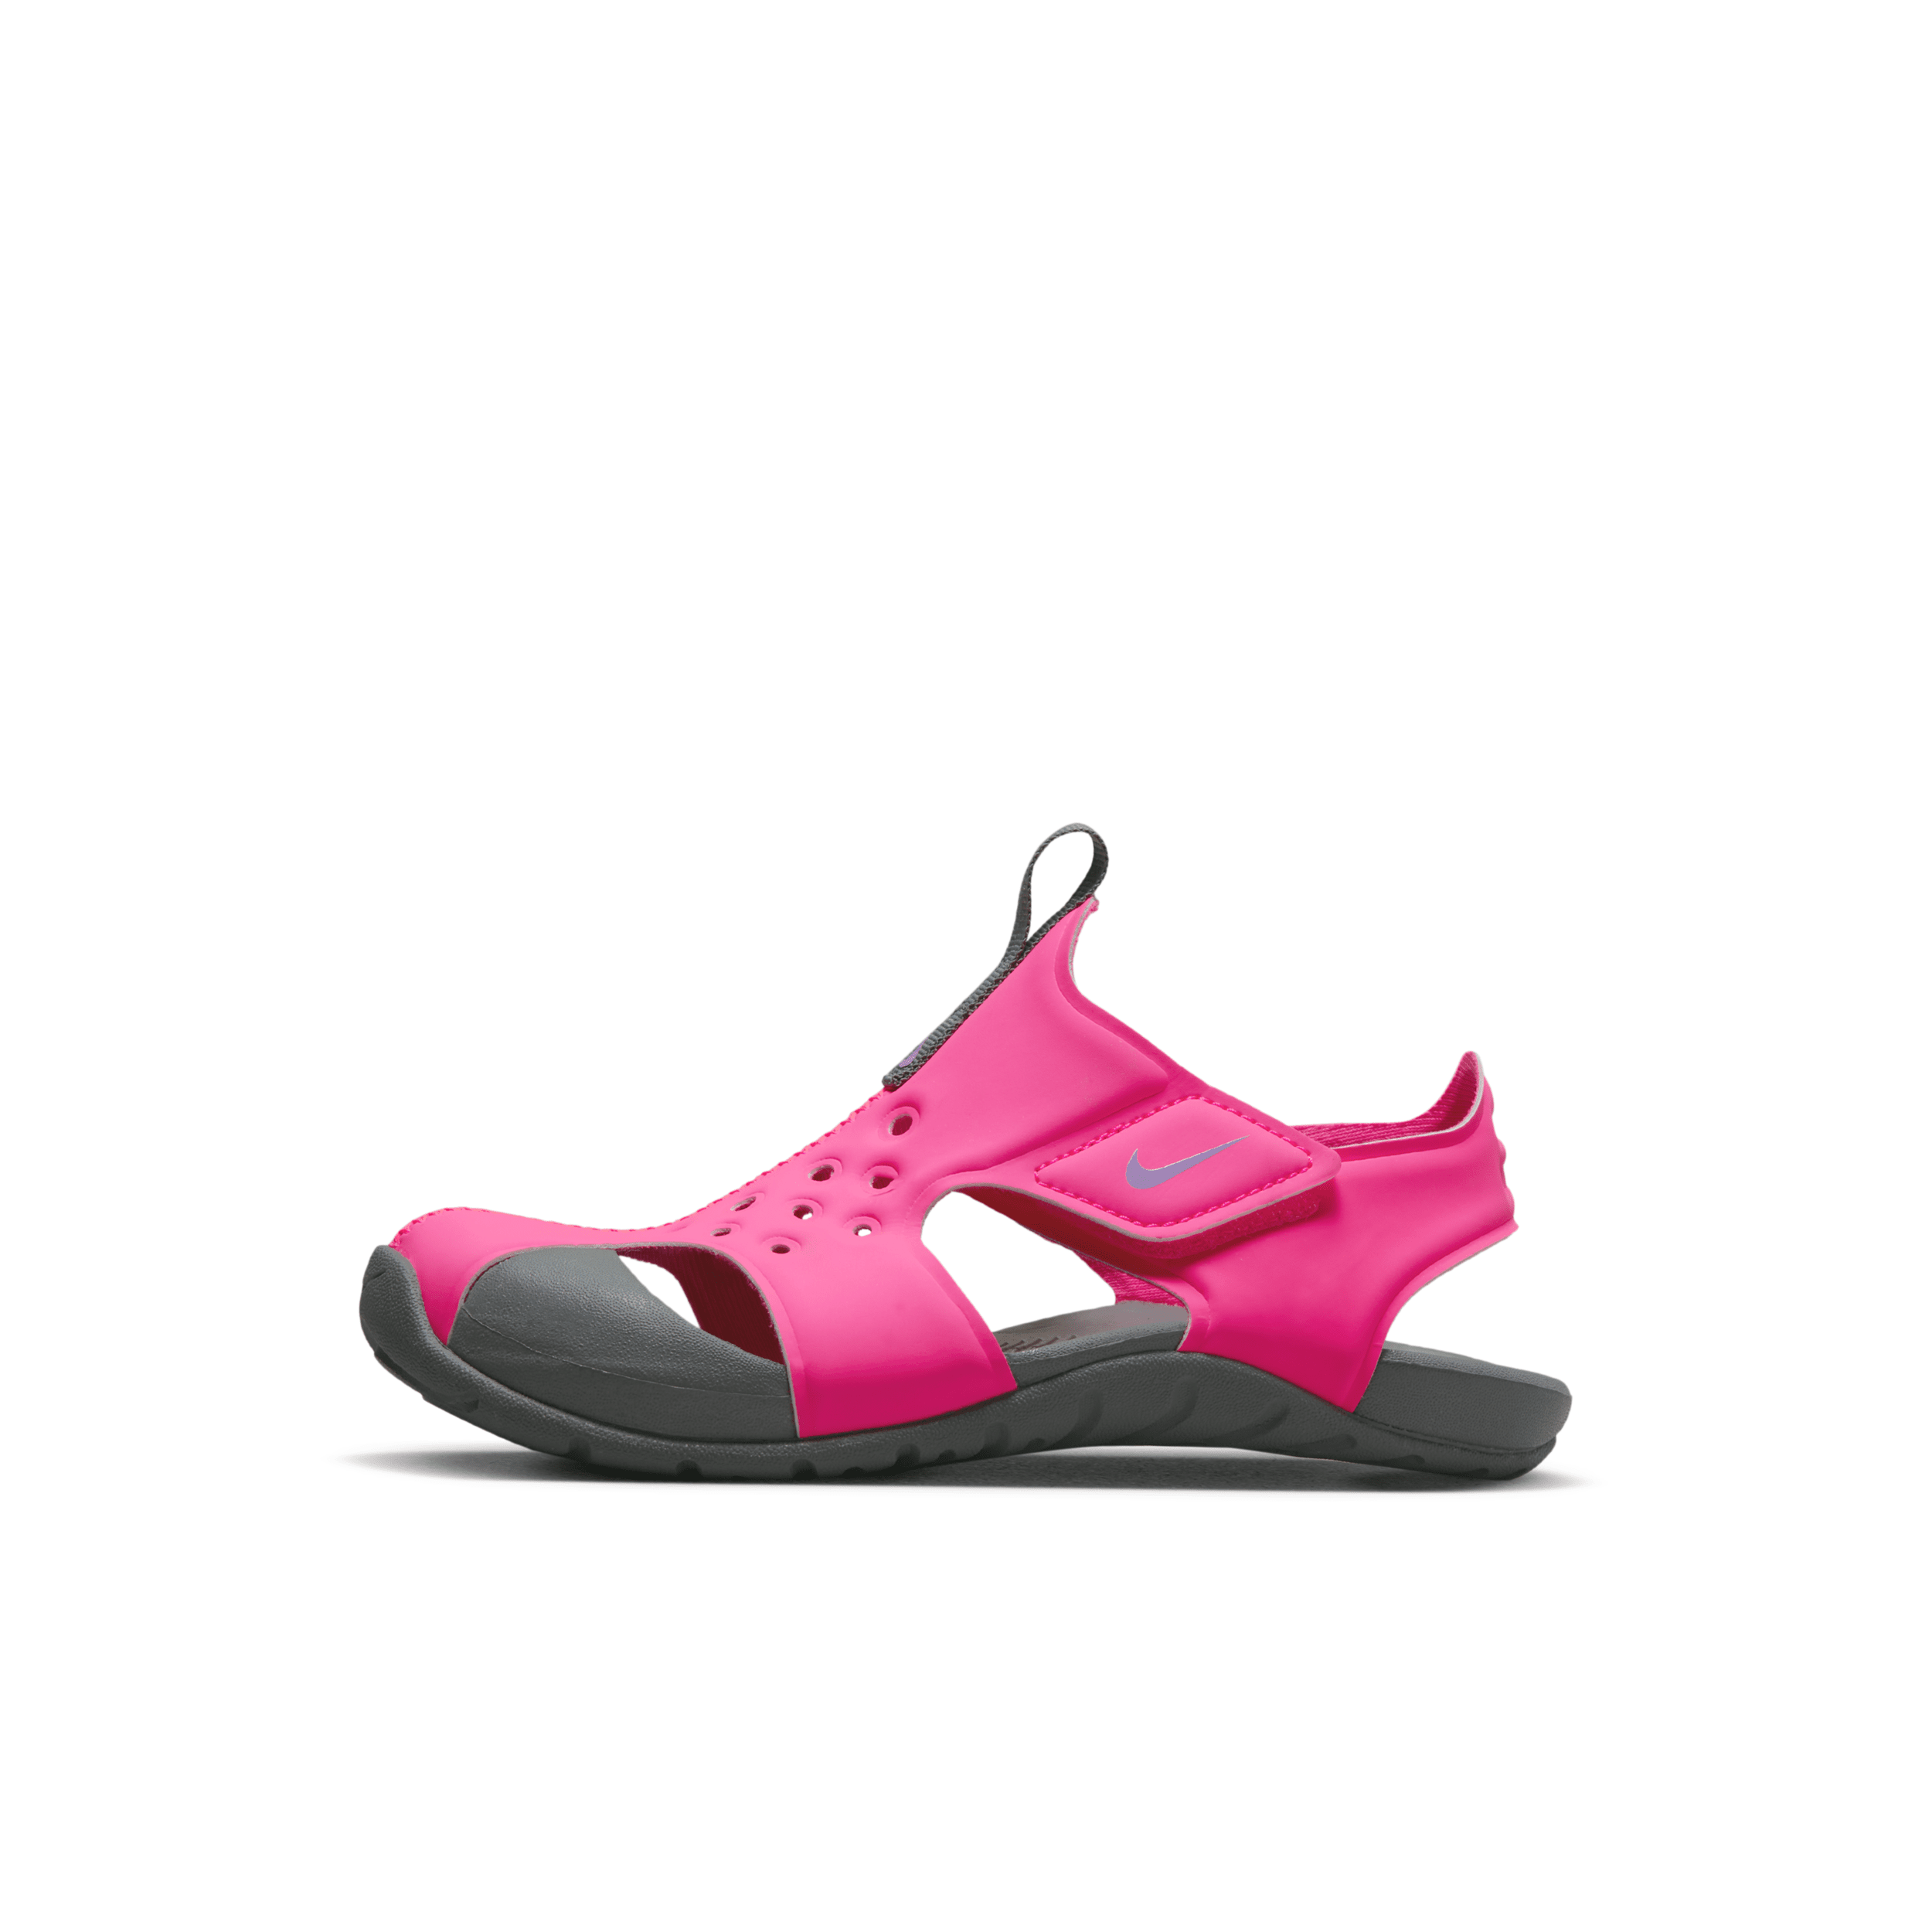 Nike Babies' Sunray Protect 2 Little Kids' Sandals In Pink